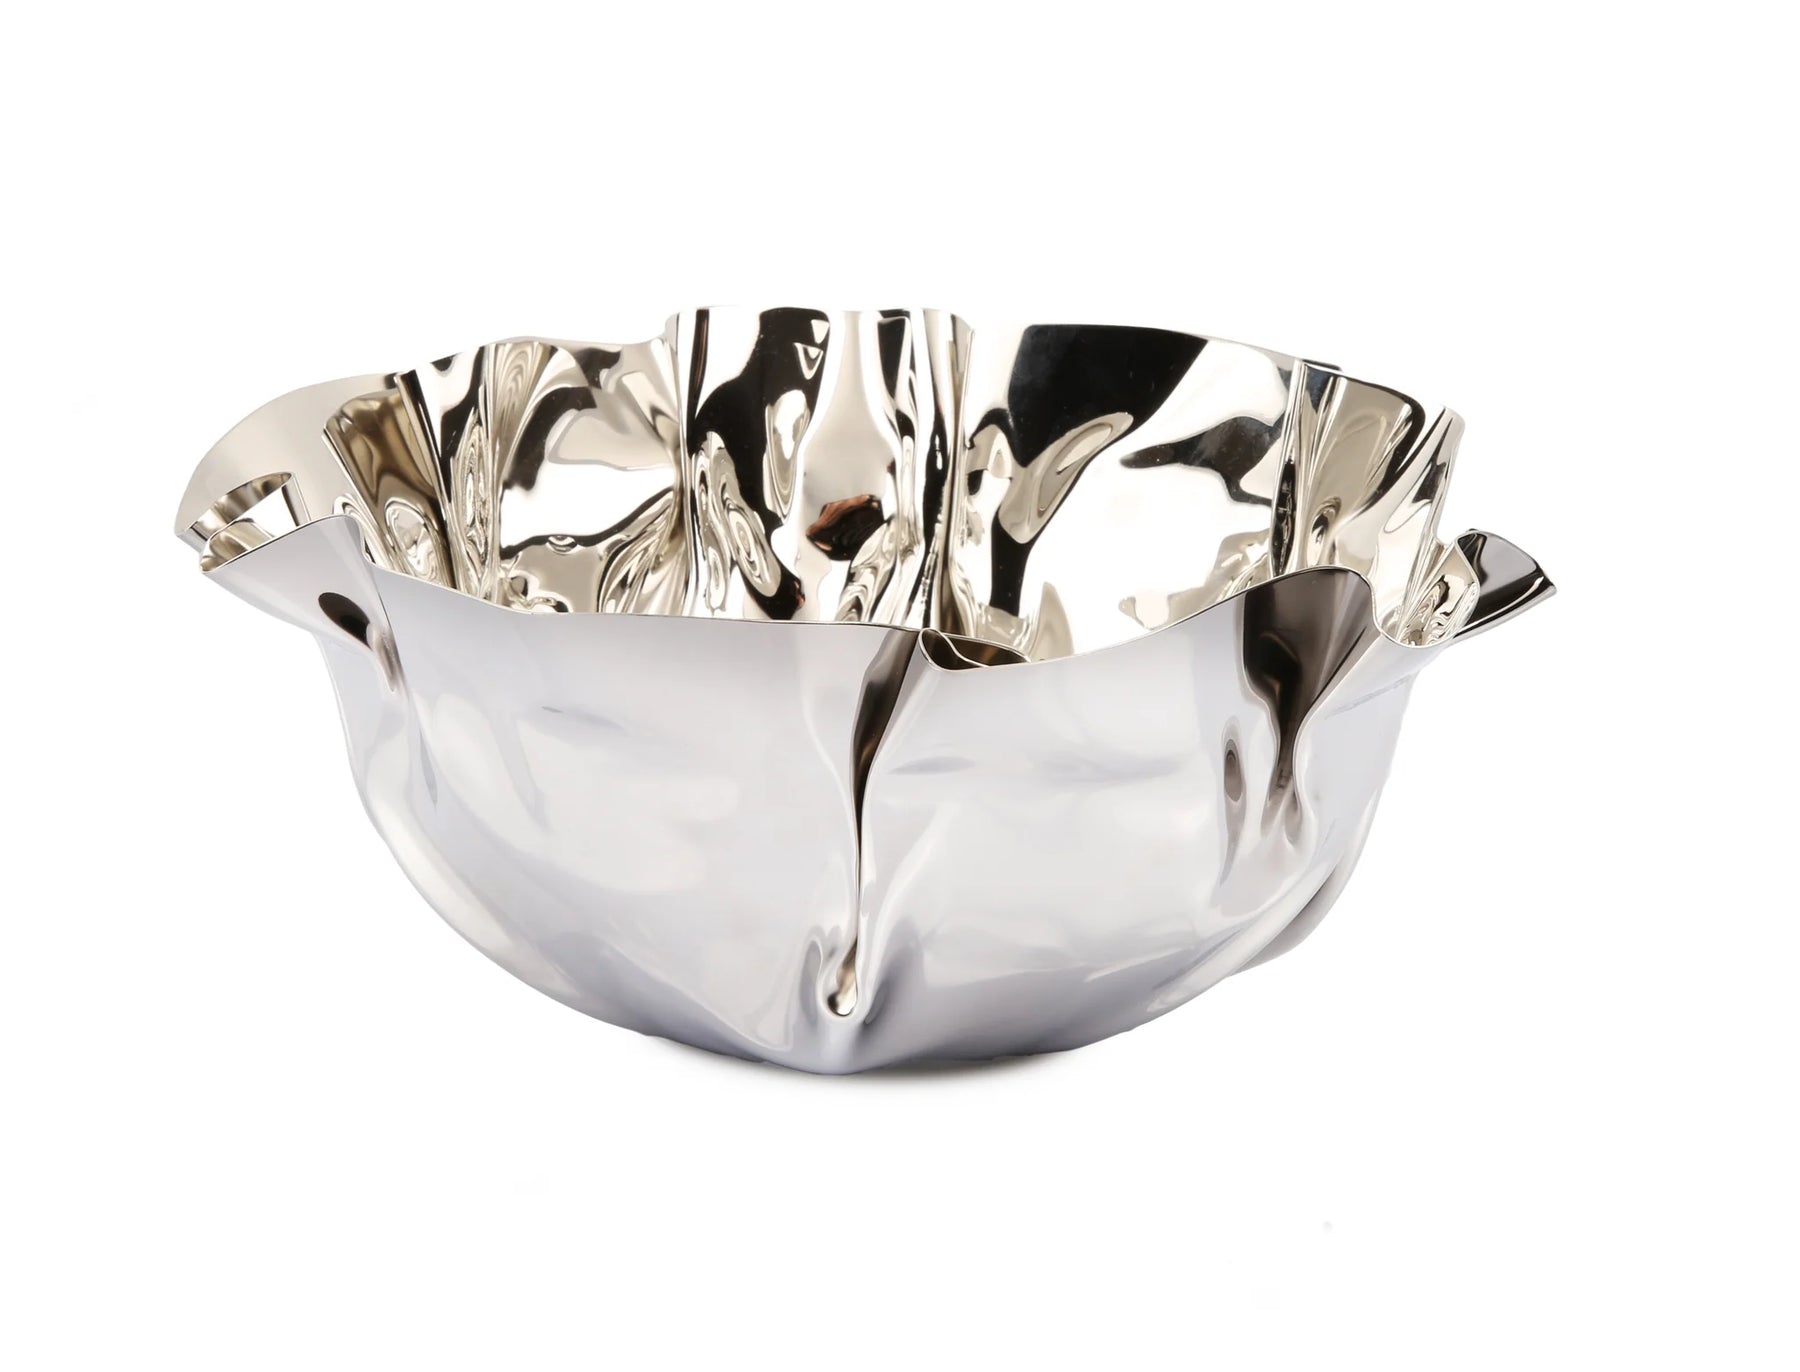 Classic Touch Stainless Steel Wavy Design Serving Bowl